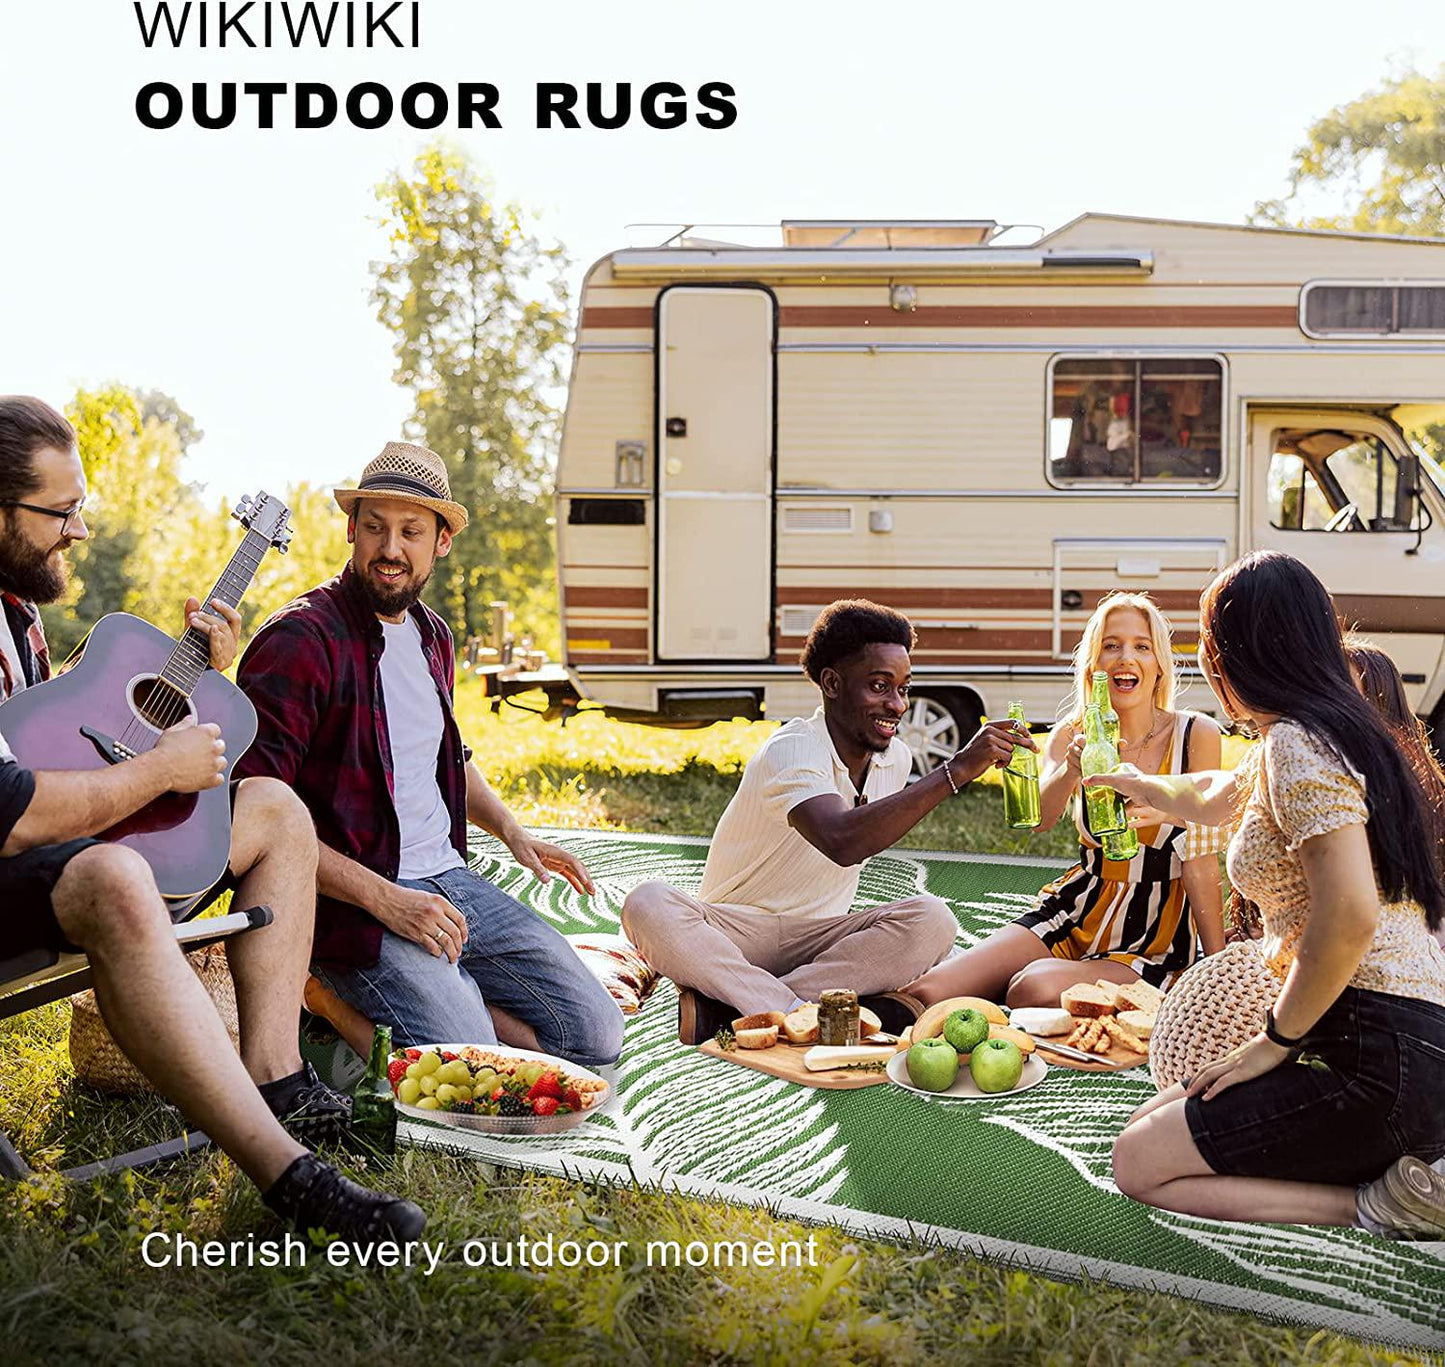 Outdoor Rugs 9x12 for Patios Clearance, Waterproof and Portable Camping Rugs for Outside Your RV, Large Indoor/Outdoor Green